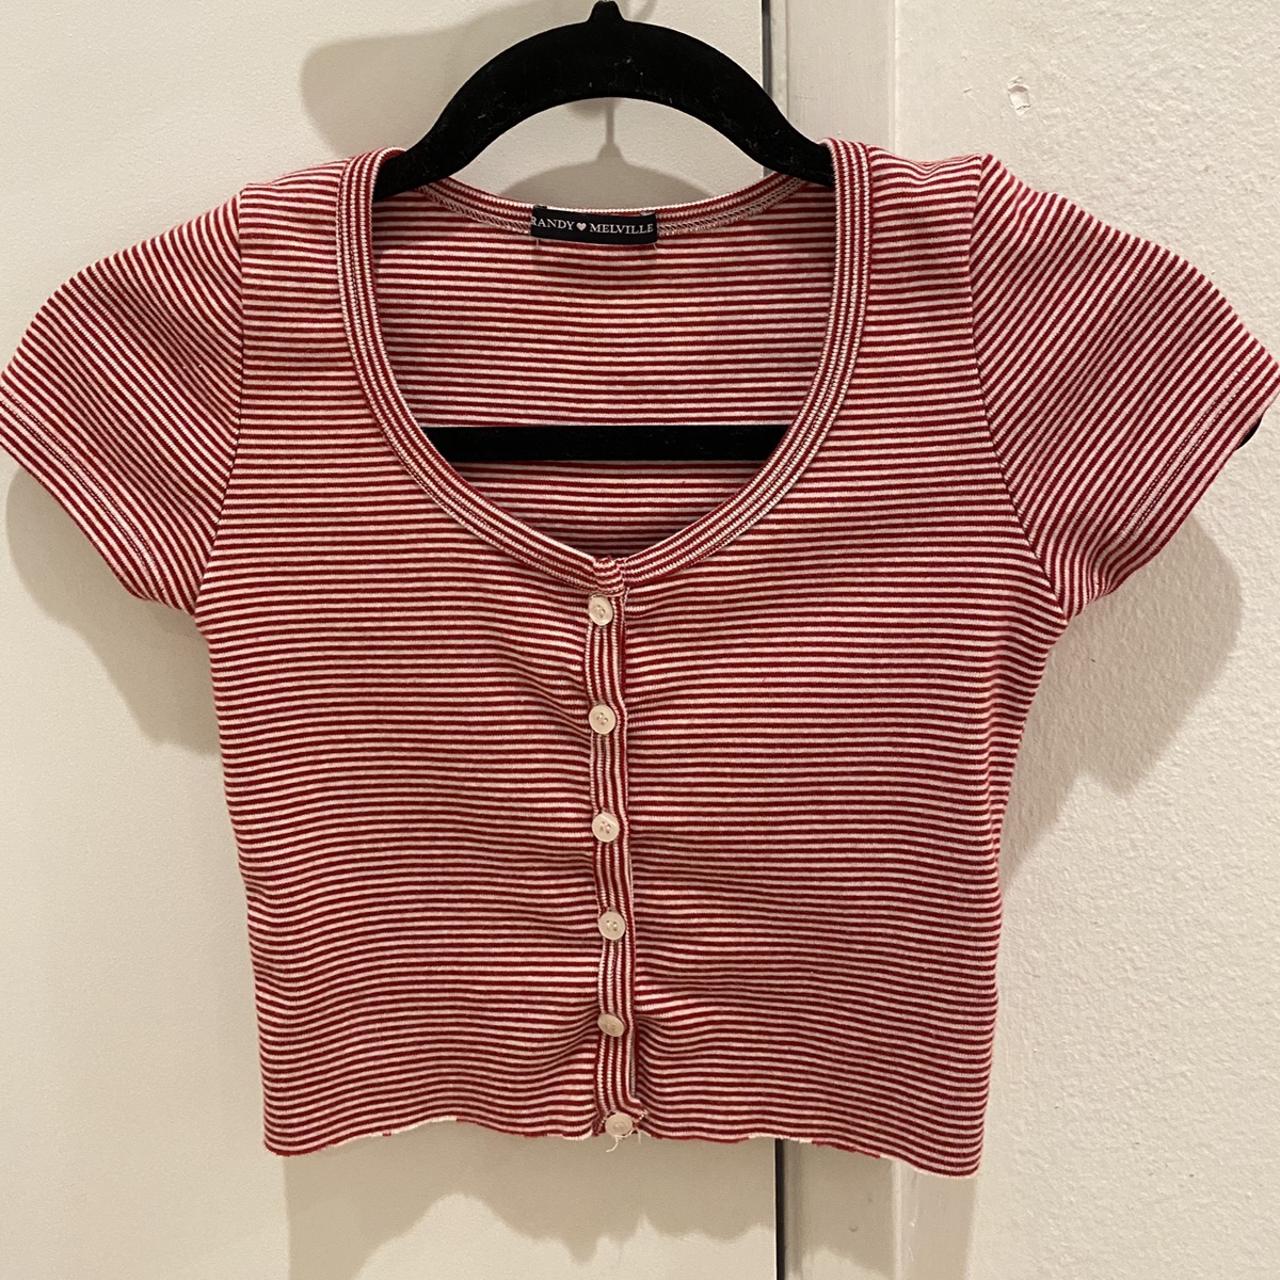 Brandy Melville Red And White Striped Shirt - $13 (71% Off Retail) - From  breana